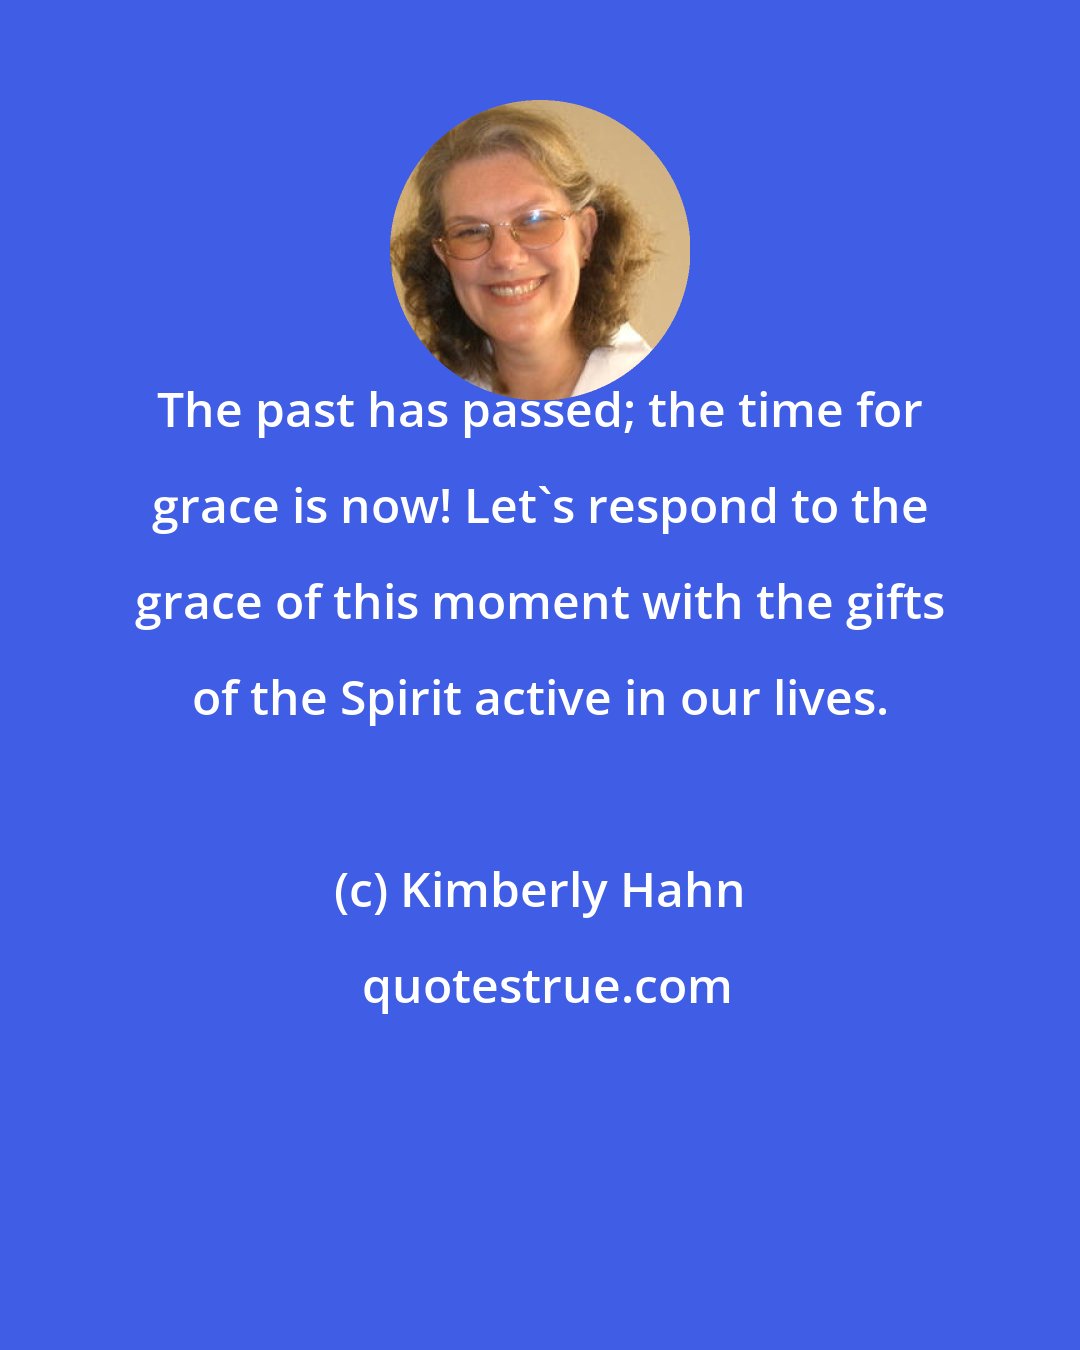 Kimberly Hahn: The past has passed; the time for grace is now! Let's respond to the grace of this moment with the gifts of the Spirit active in our lives.